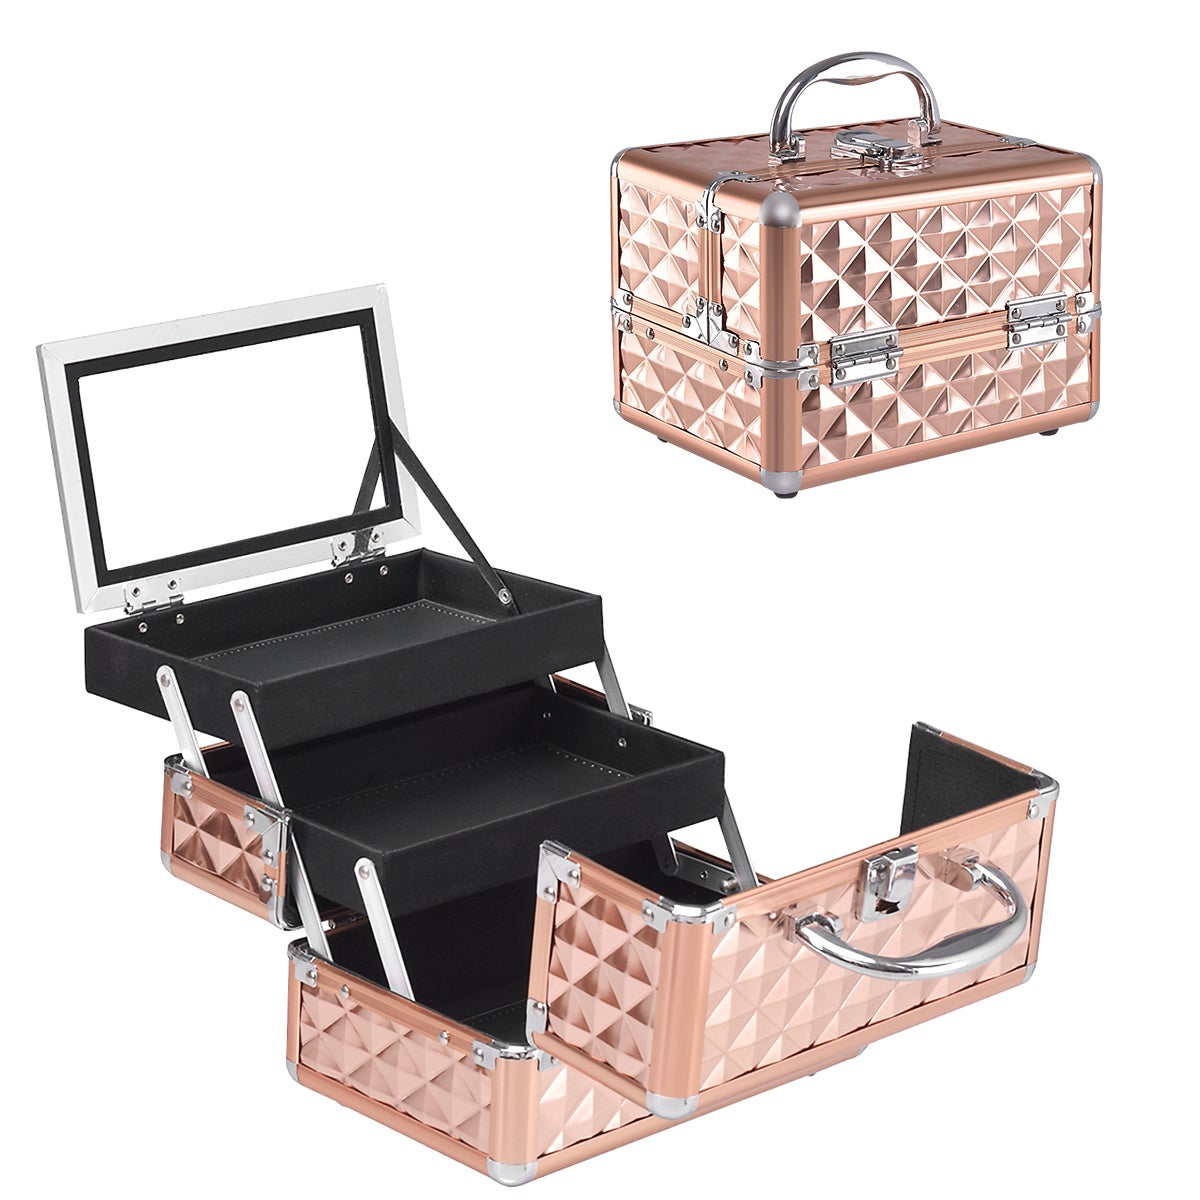 Costway Portable Cosmetic Makeup Case, Beauty Case, Makeup Organiser, with Mirror / Rosegold